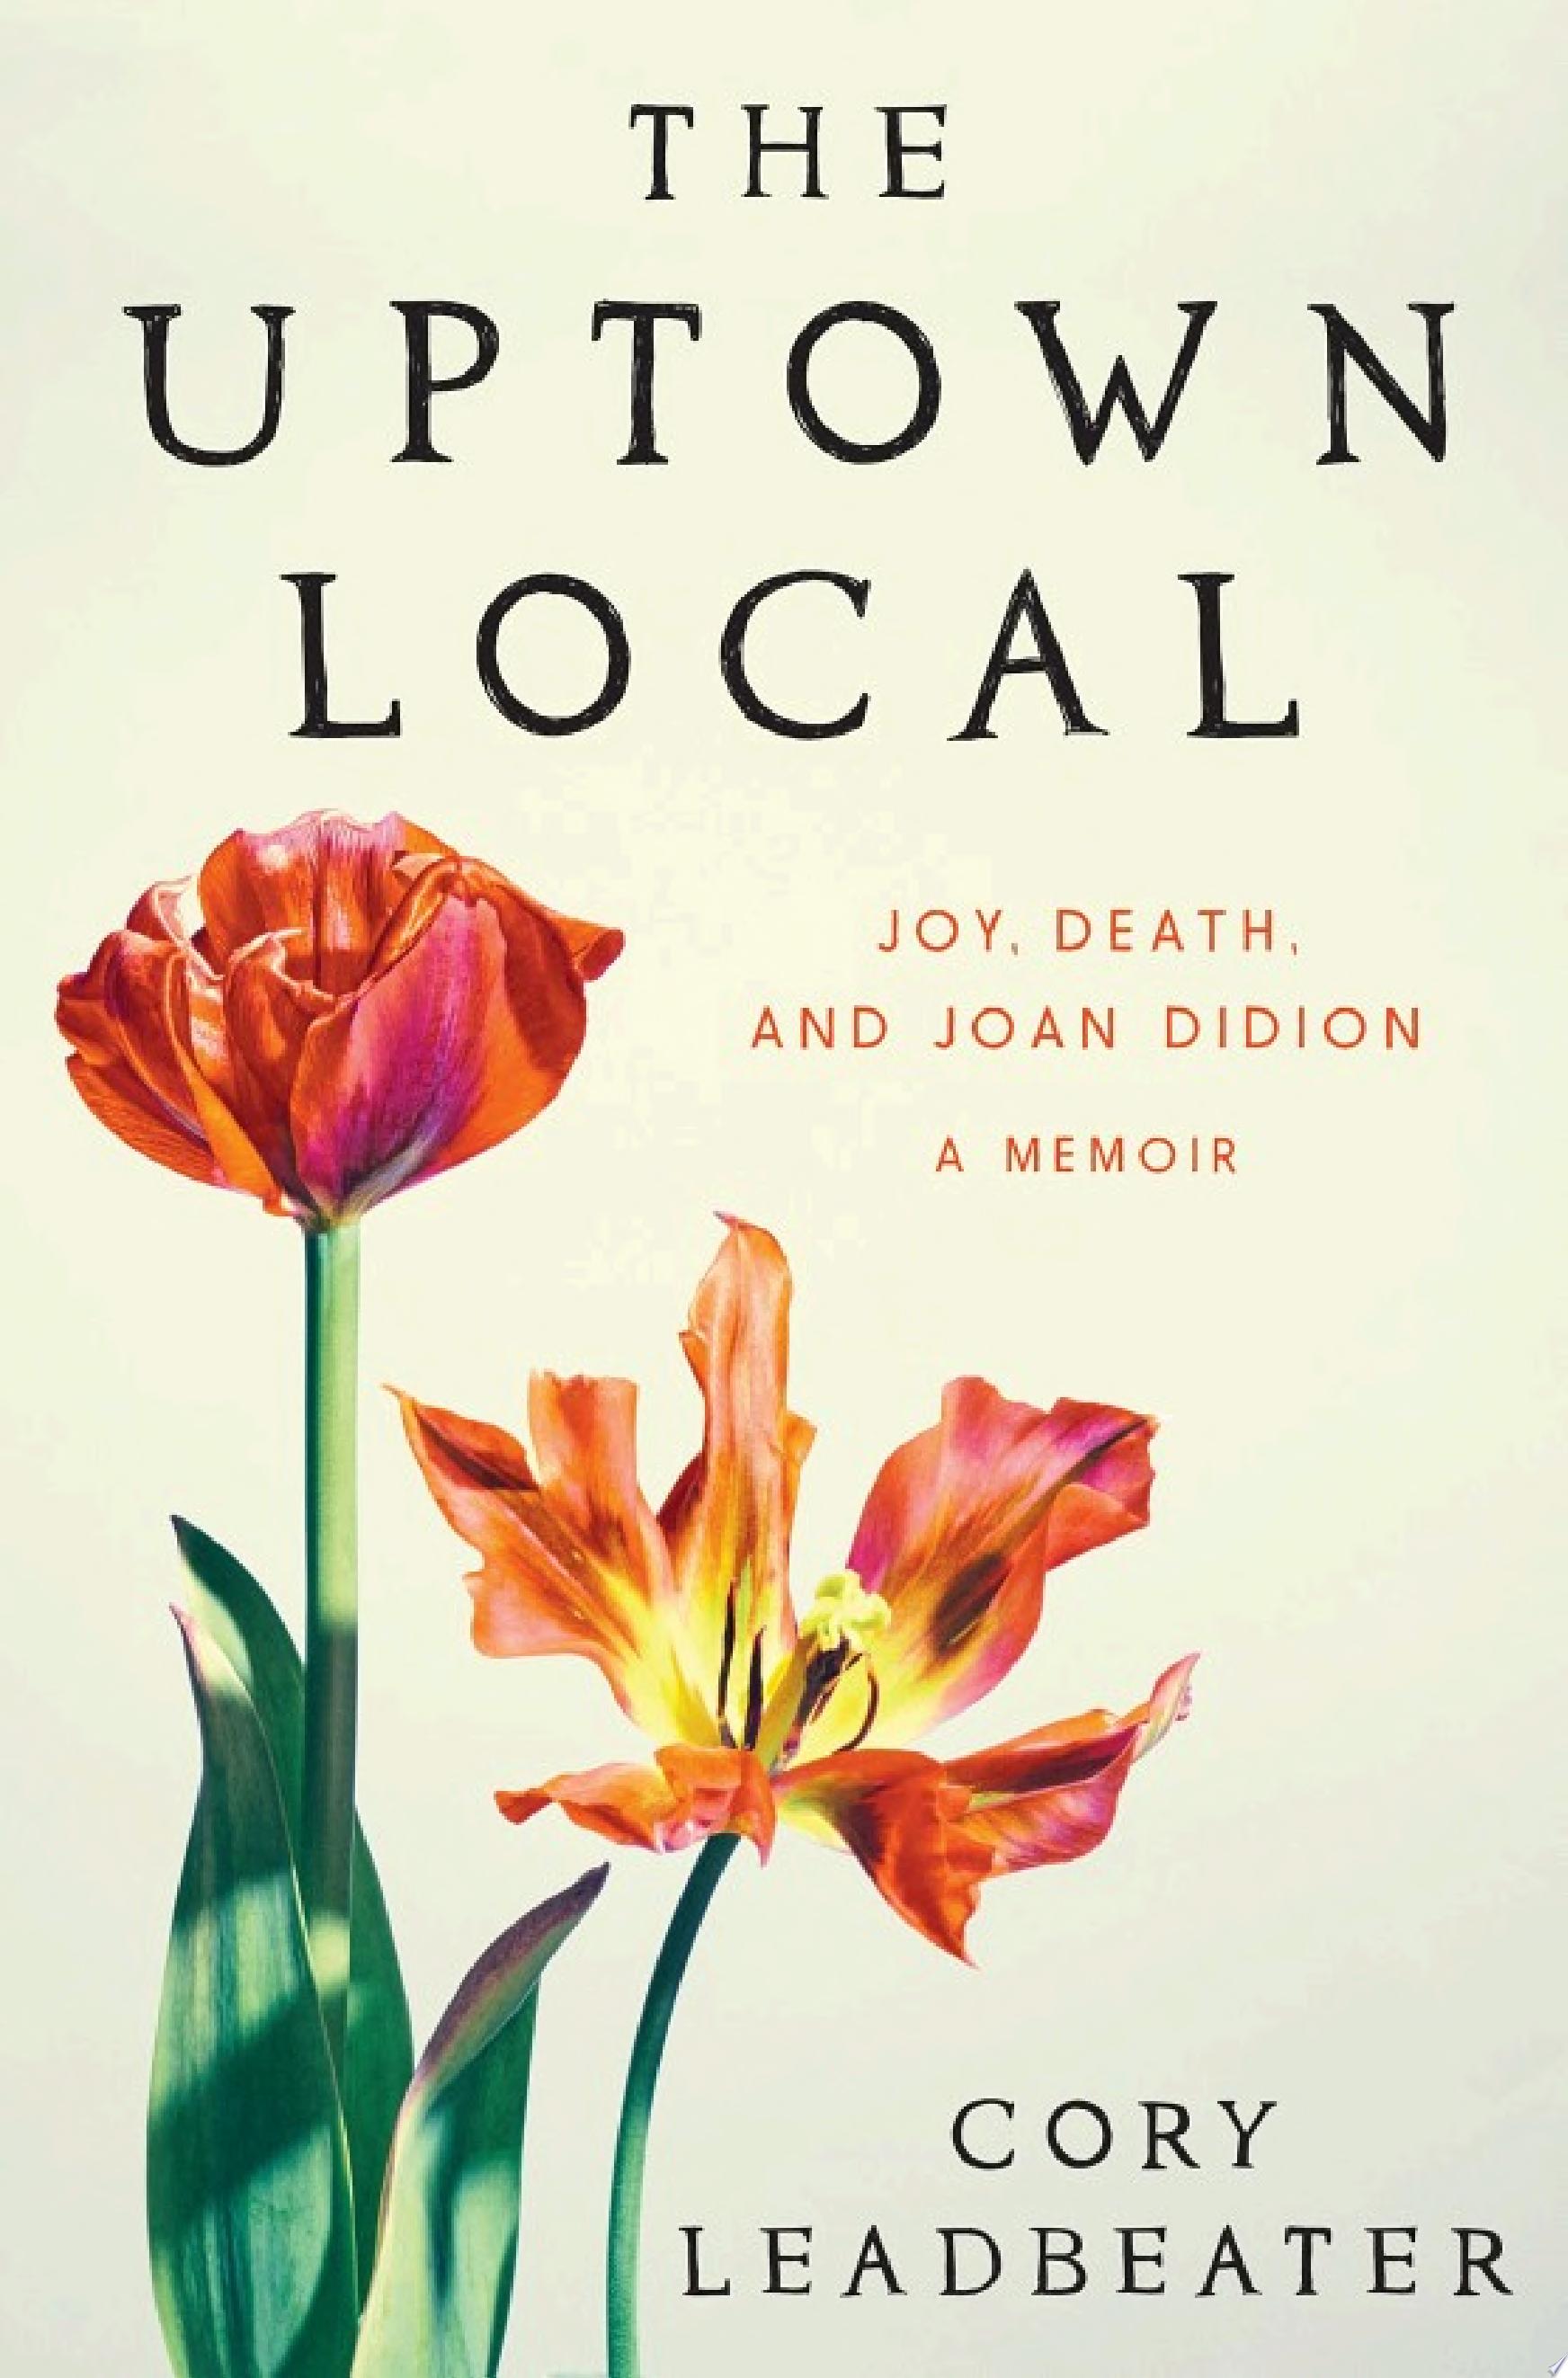 Image for "The Uptown Local"